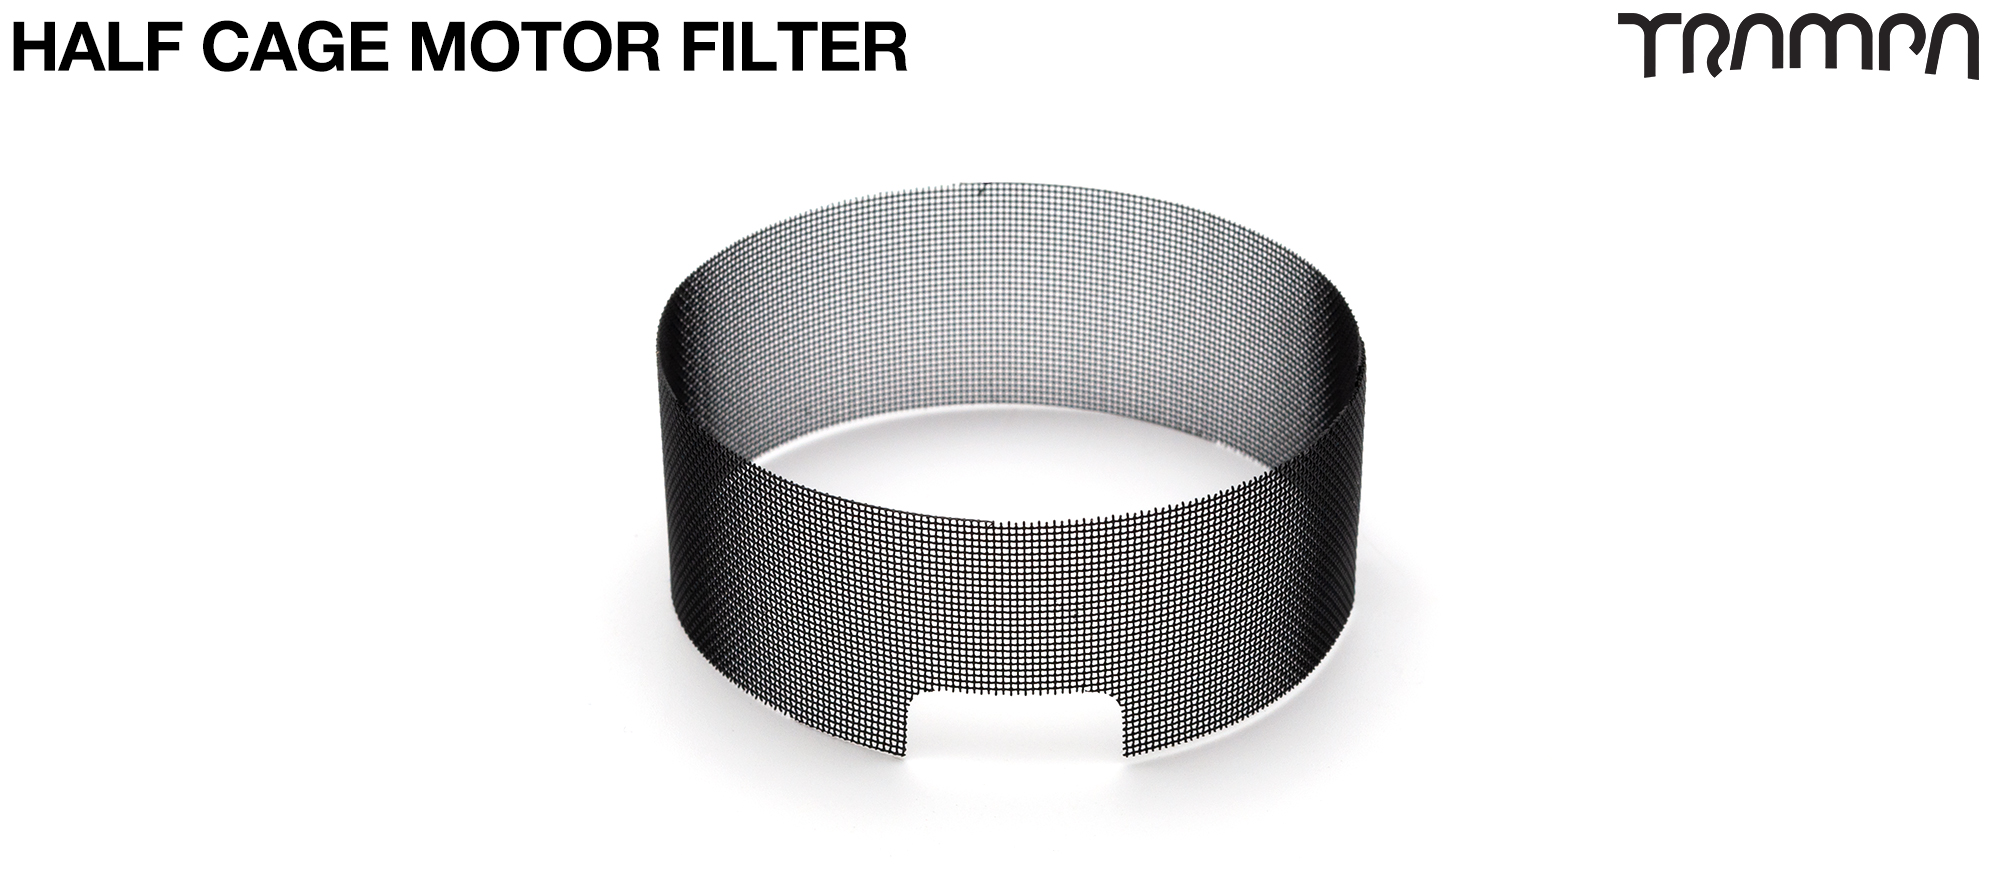 HALF CAGE Stainless Steel Motor protection FILTER - BLACK